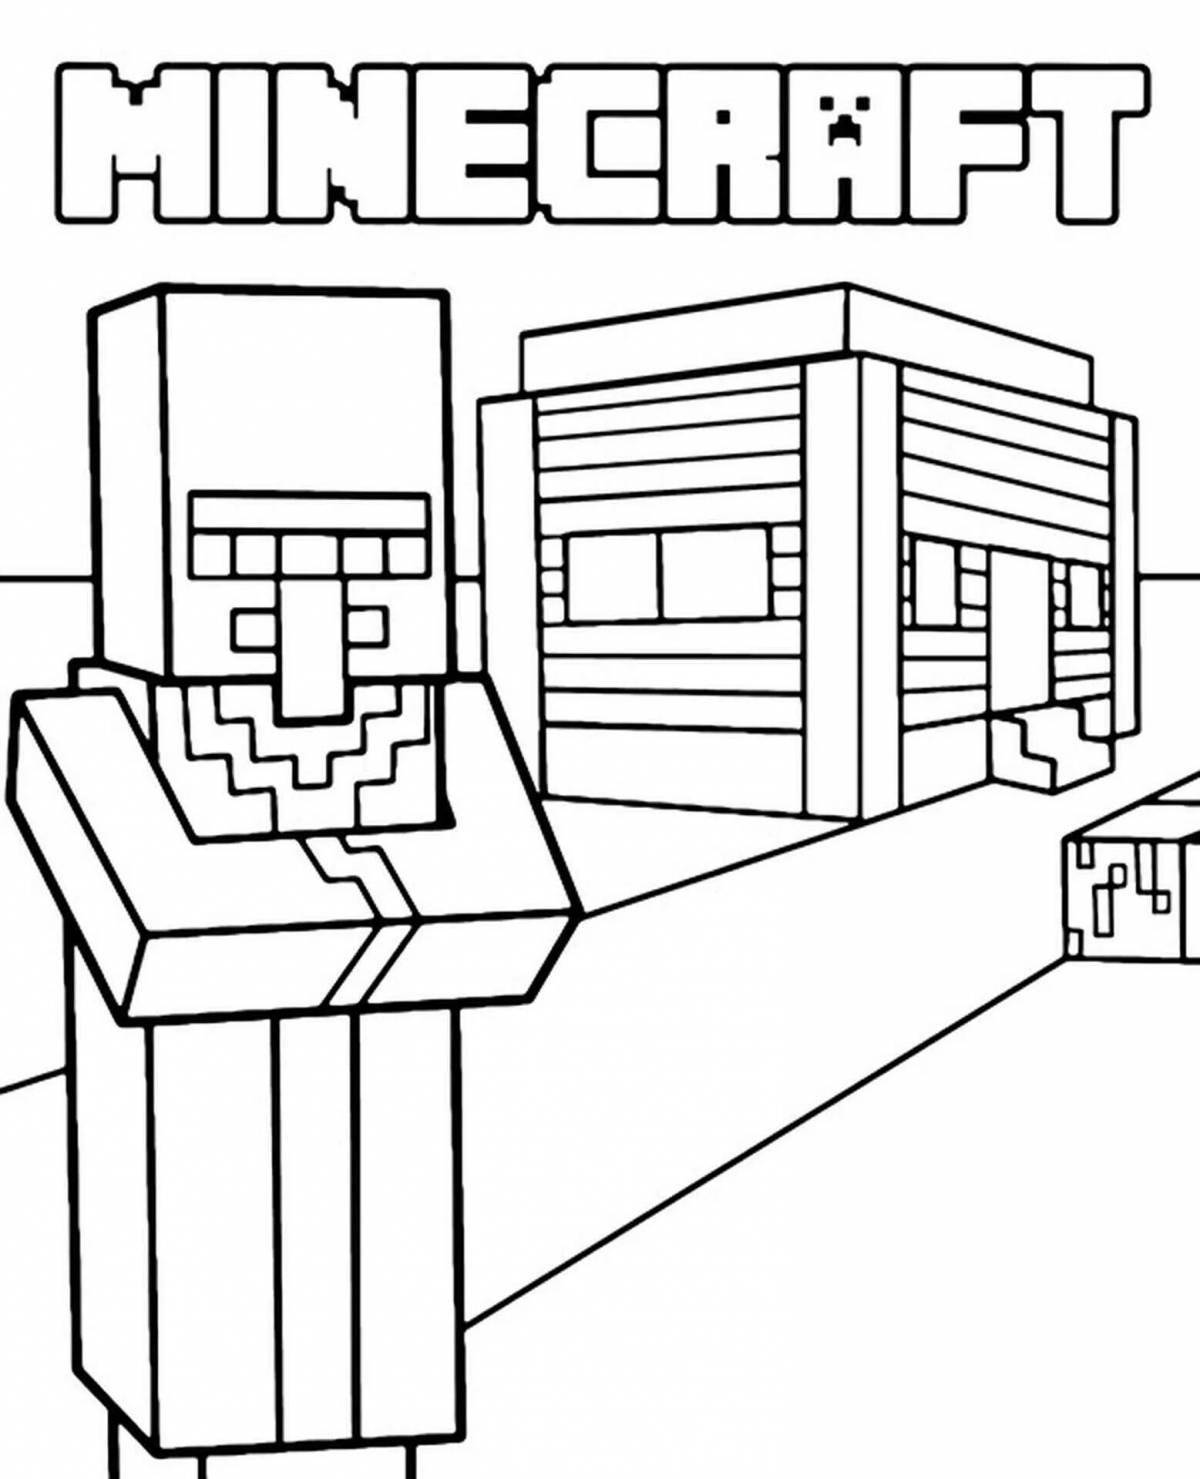 Colorful minecraft villager coloring page